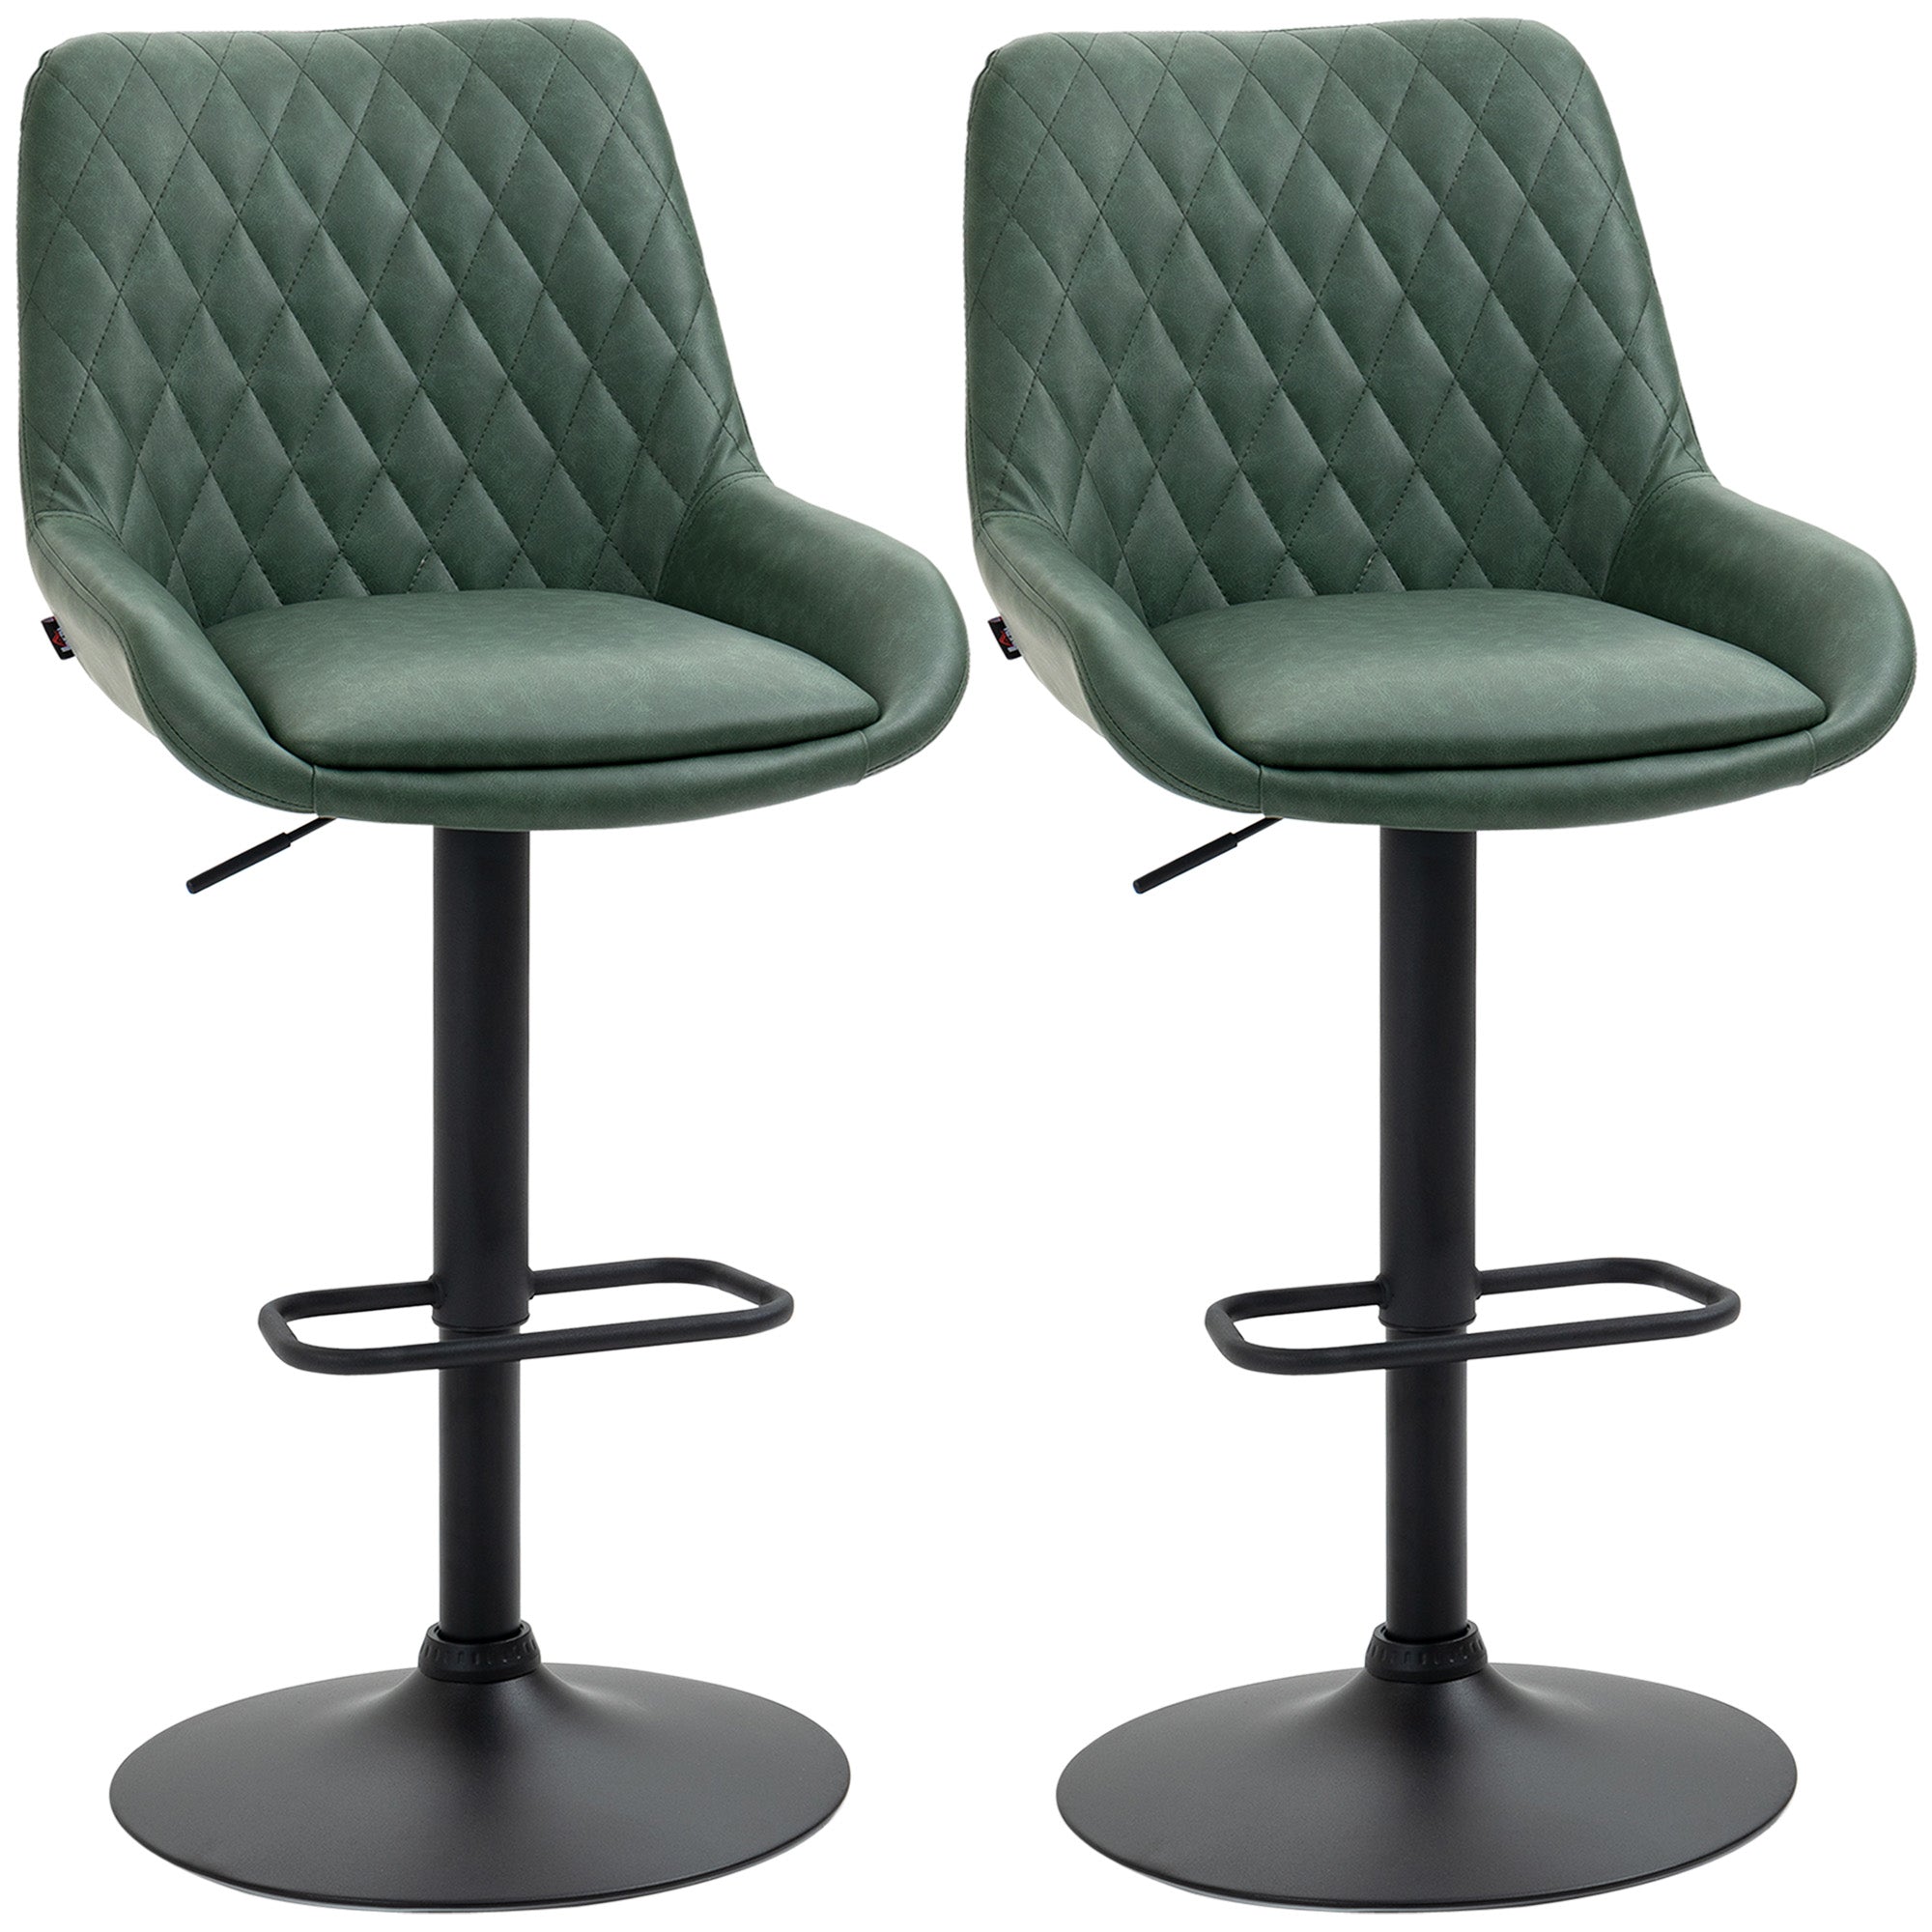 Retro Bar Stools Set of 2, Adjustable Kitchen Stool, Upholstered Bar Chairs with Back, Swivel Seat, Green  AOSOM   